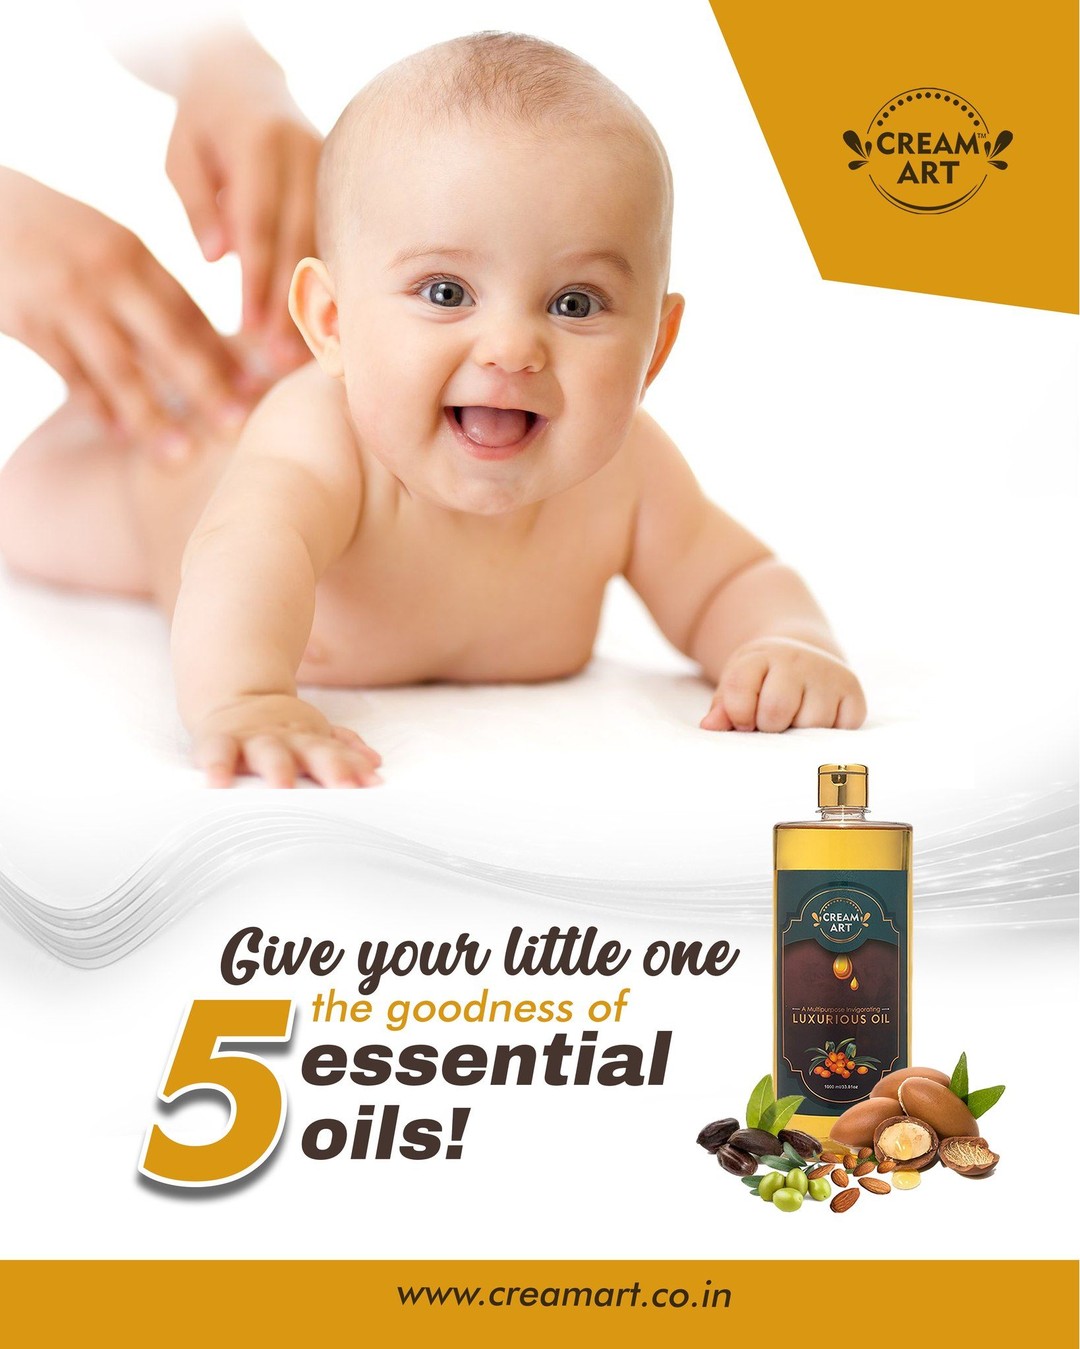 The Luxurious Multi-Purpose Oil Is Not Just For Top-To-Toe Care For Adults, But People Of All Ages Can Use It, Even Babies For Their Daily Massage. Say Hi To All Round Baby Skin Nourishment.For More Details Visit: https://creamart.co.in/#bodyoil #essentialoil #bodycare #skincare #skincareroutine #multipurposeoil #creamart